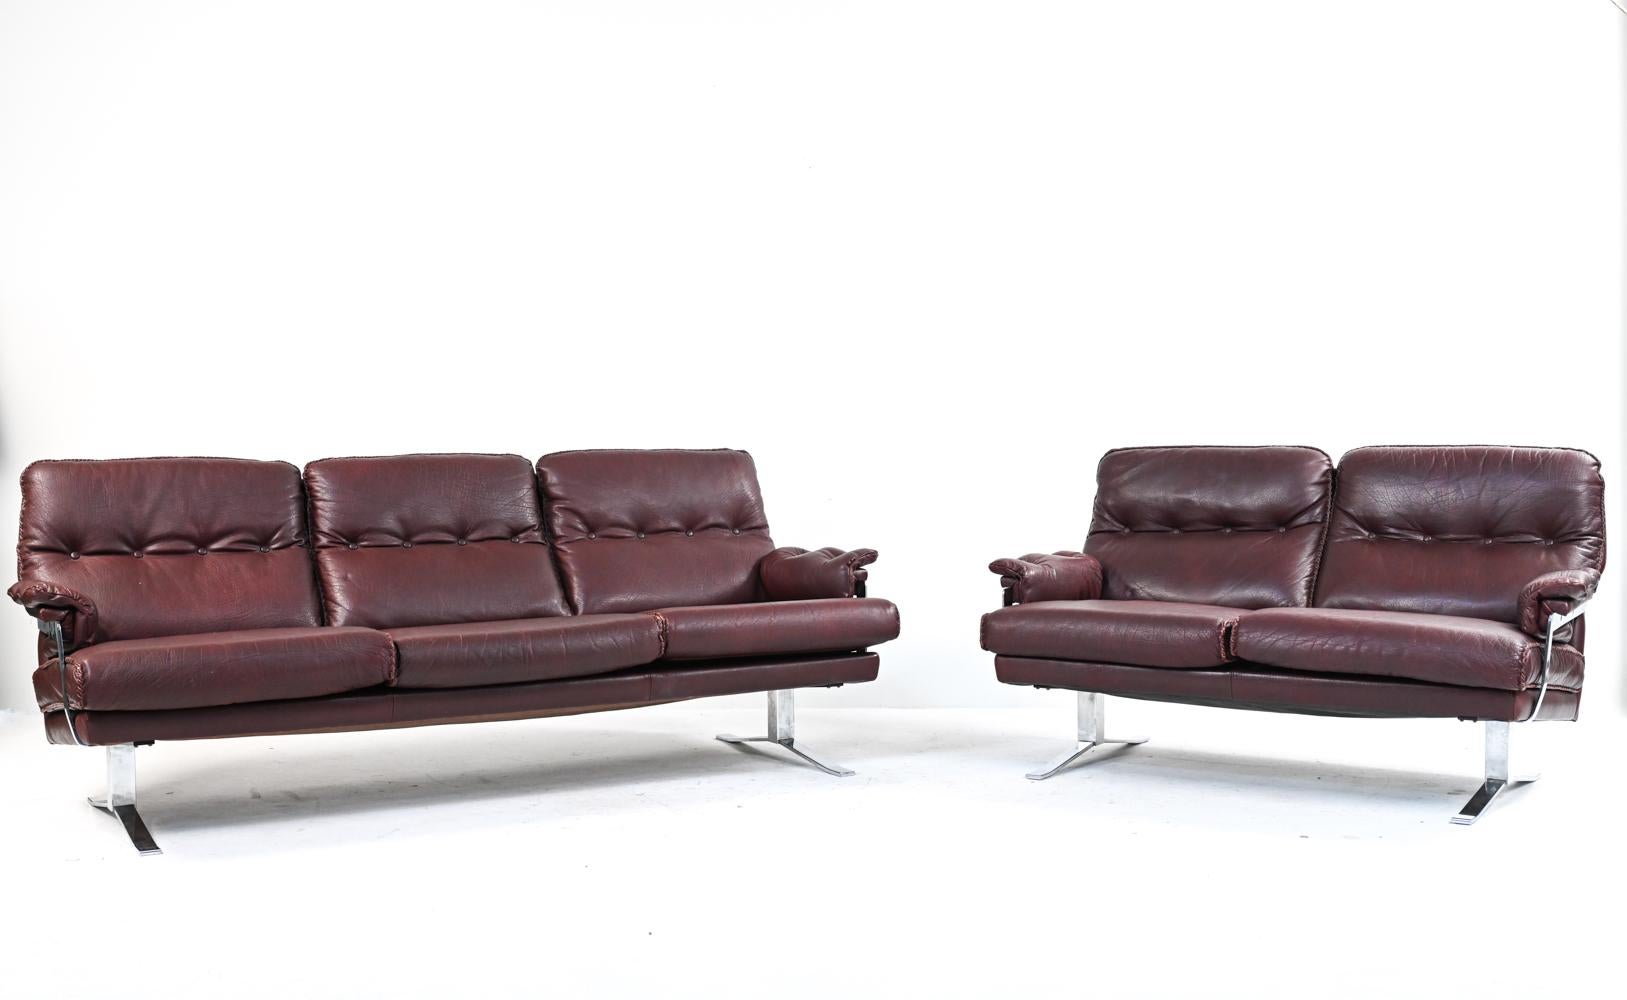 A rare (2) piece sofa suite in chocolate brown buffalo leather and chrome with fabulous whipstitch trim, designed by Arne Norell for Vatne Møbler and produced in the 1960's-1970's. Includes a loveseat and three-seater sofa.